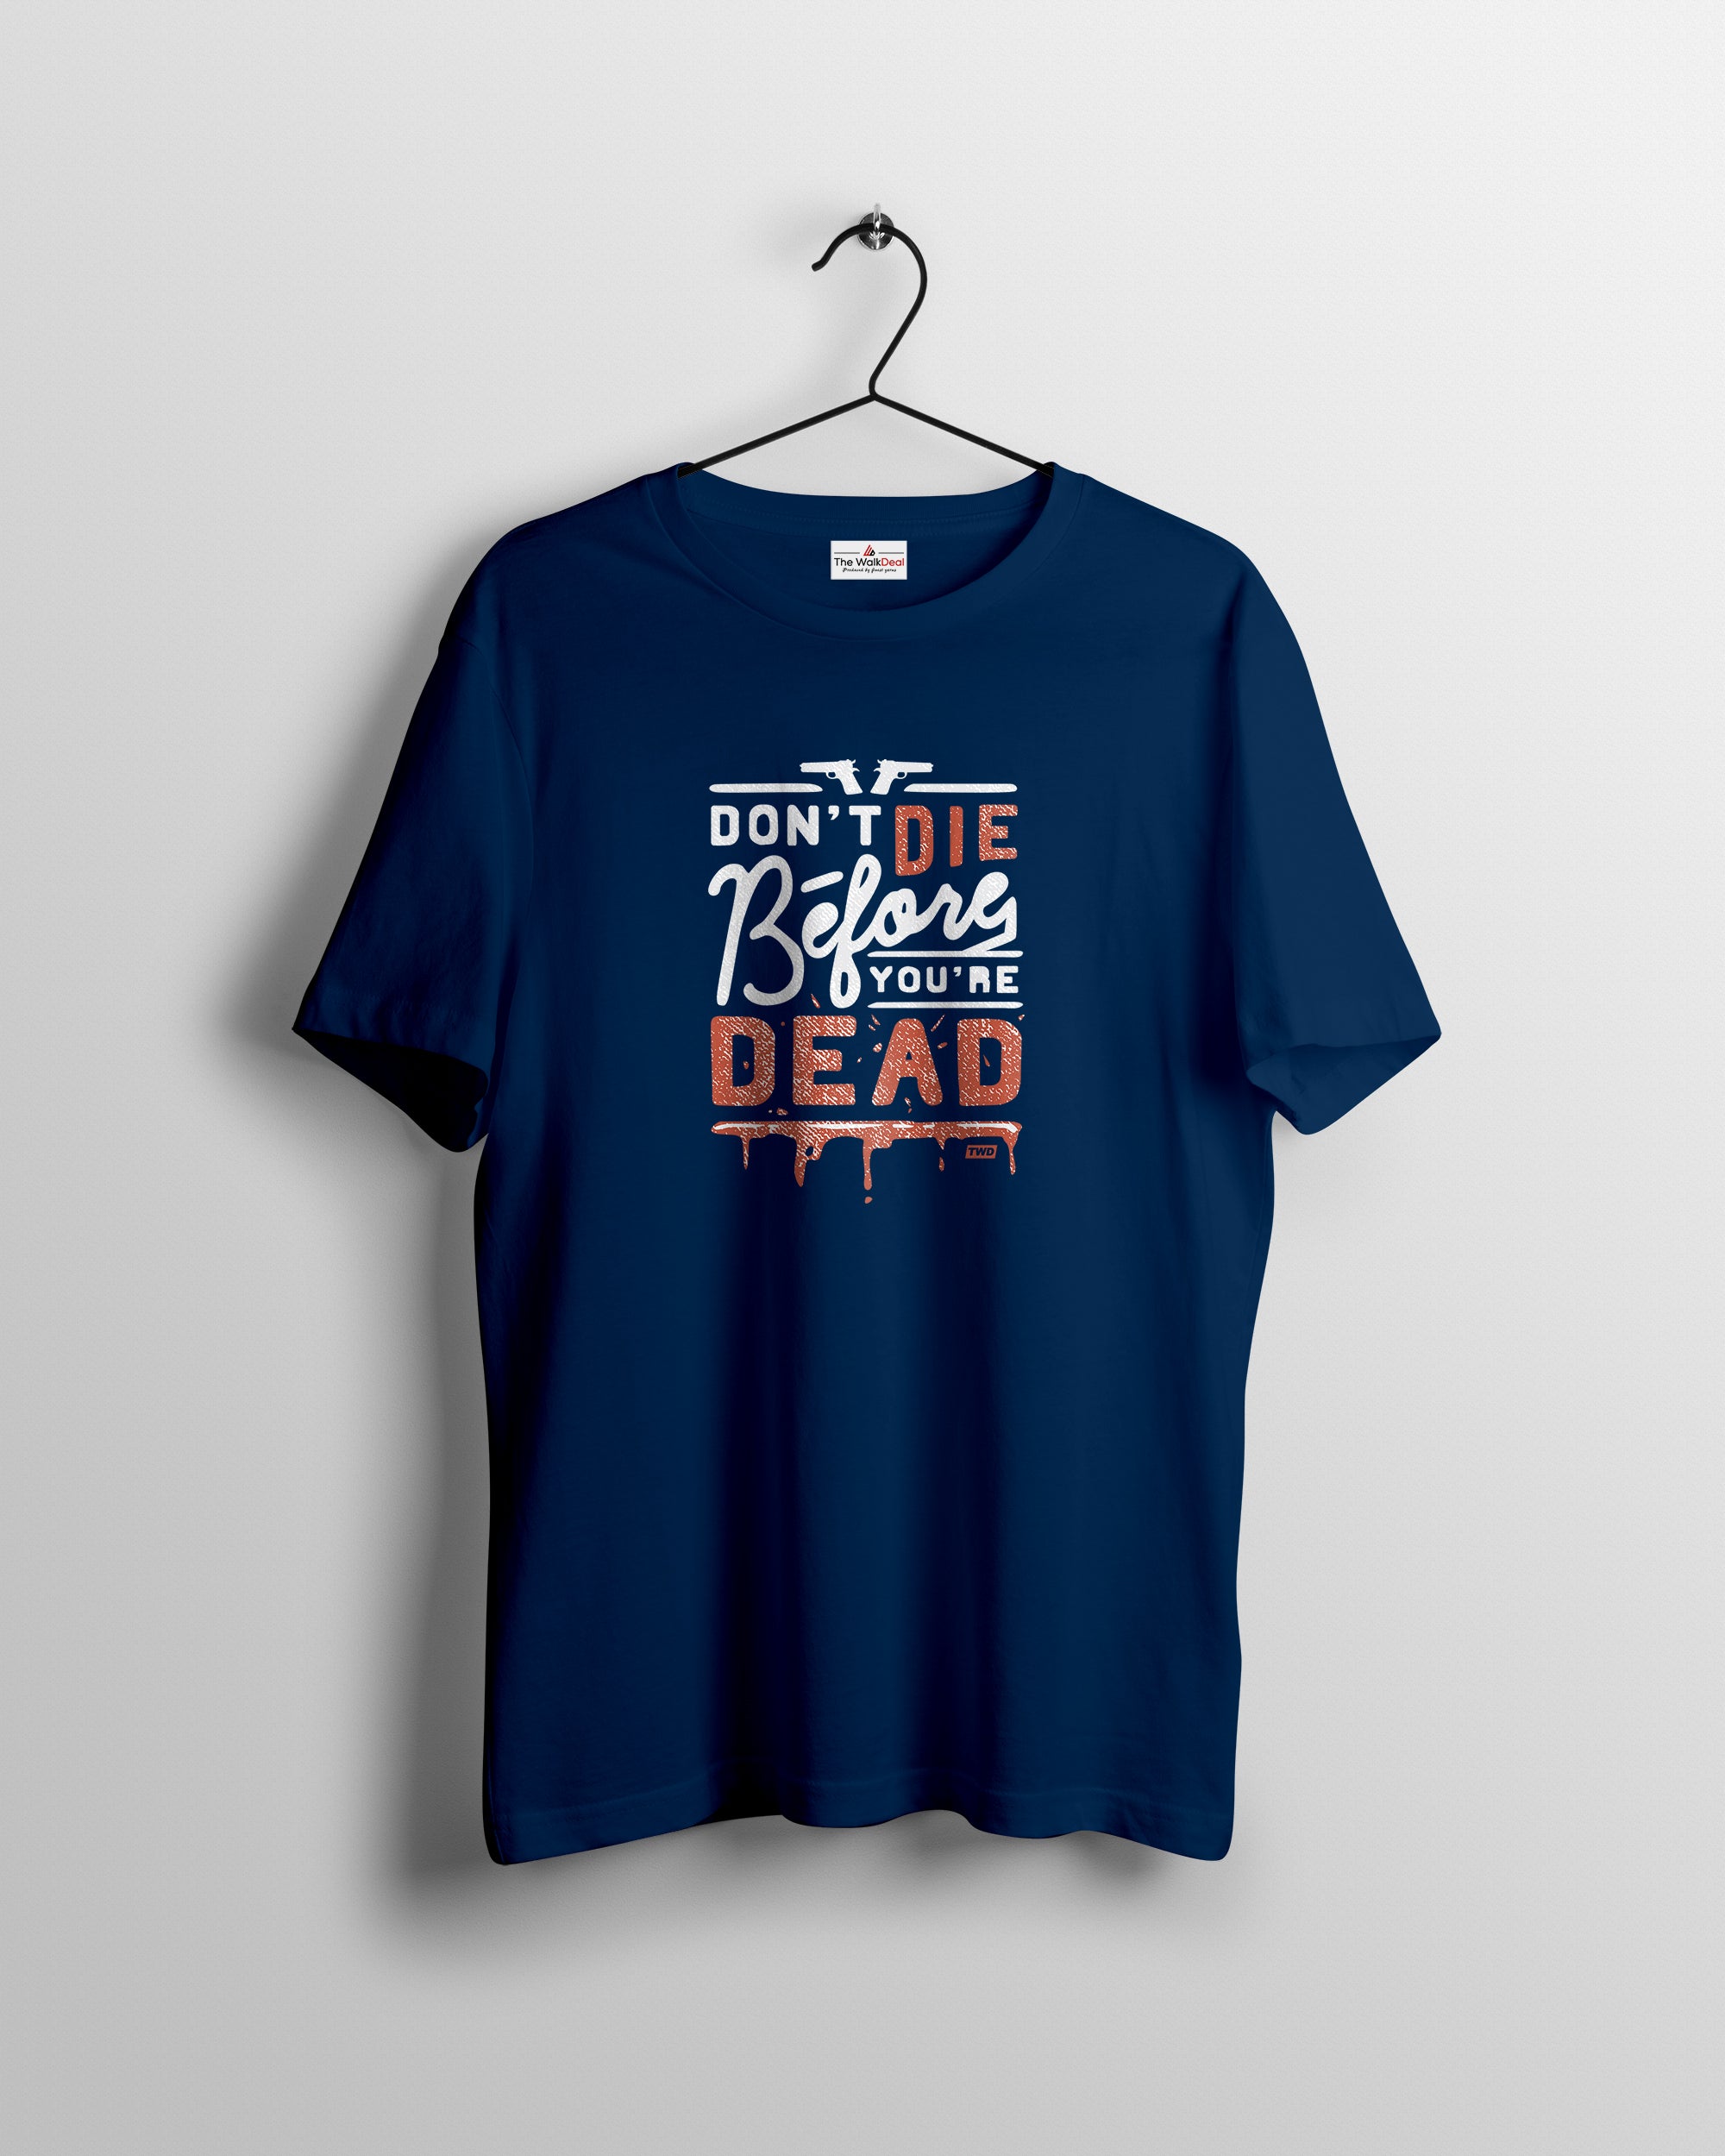 Don't-Die T-Shirts For Men || Navy Blue || Stylish Tshirts || 100% Cotton || Best T-Shirt For Men's